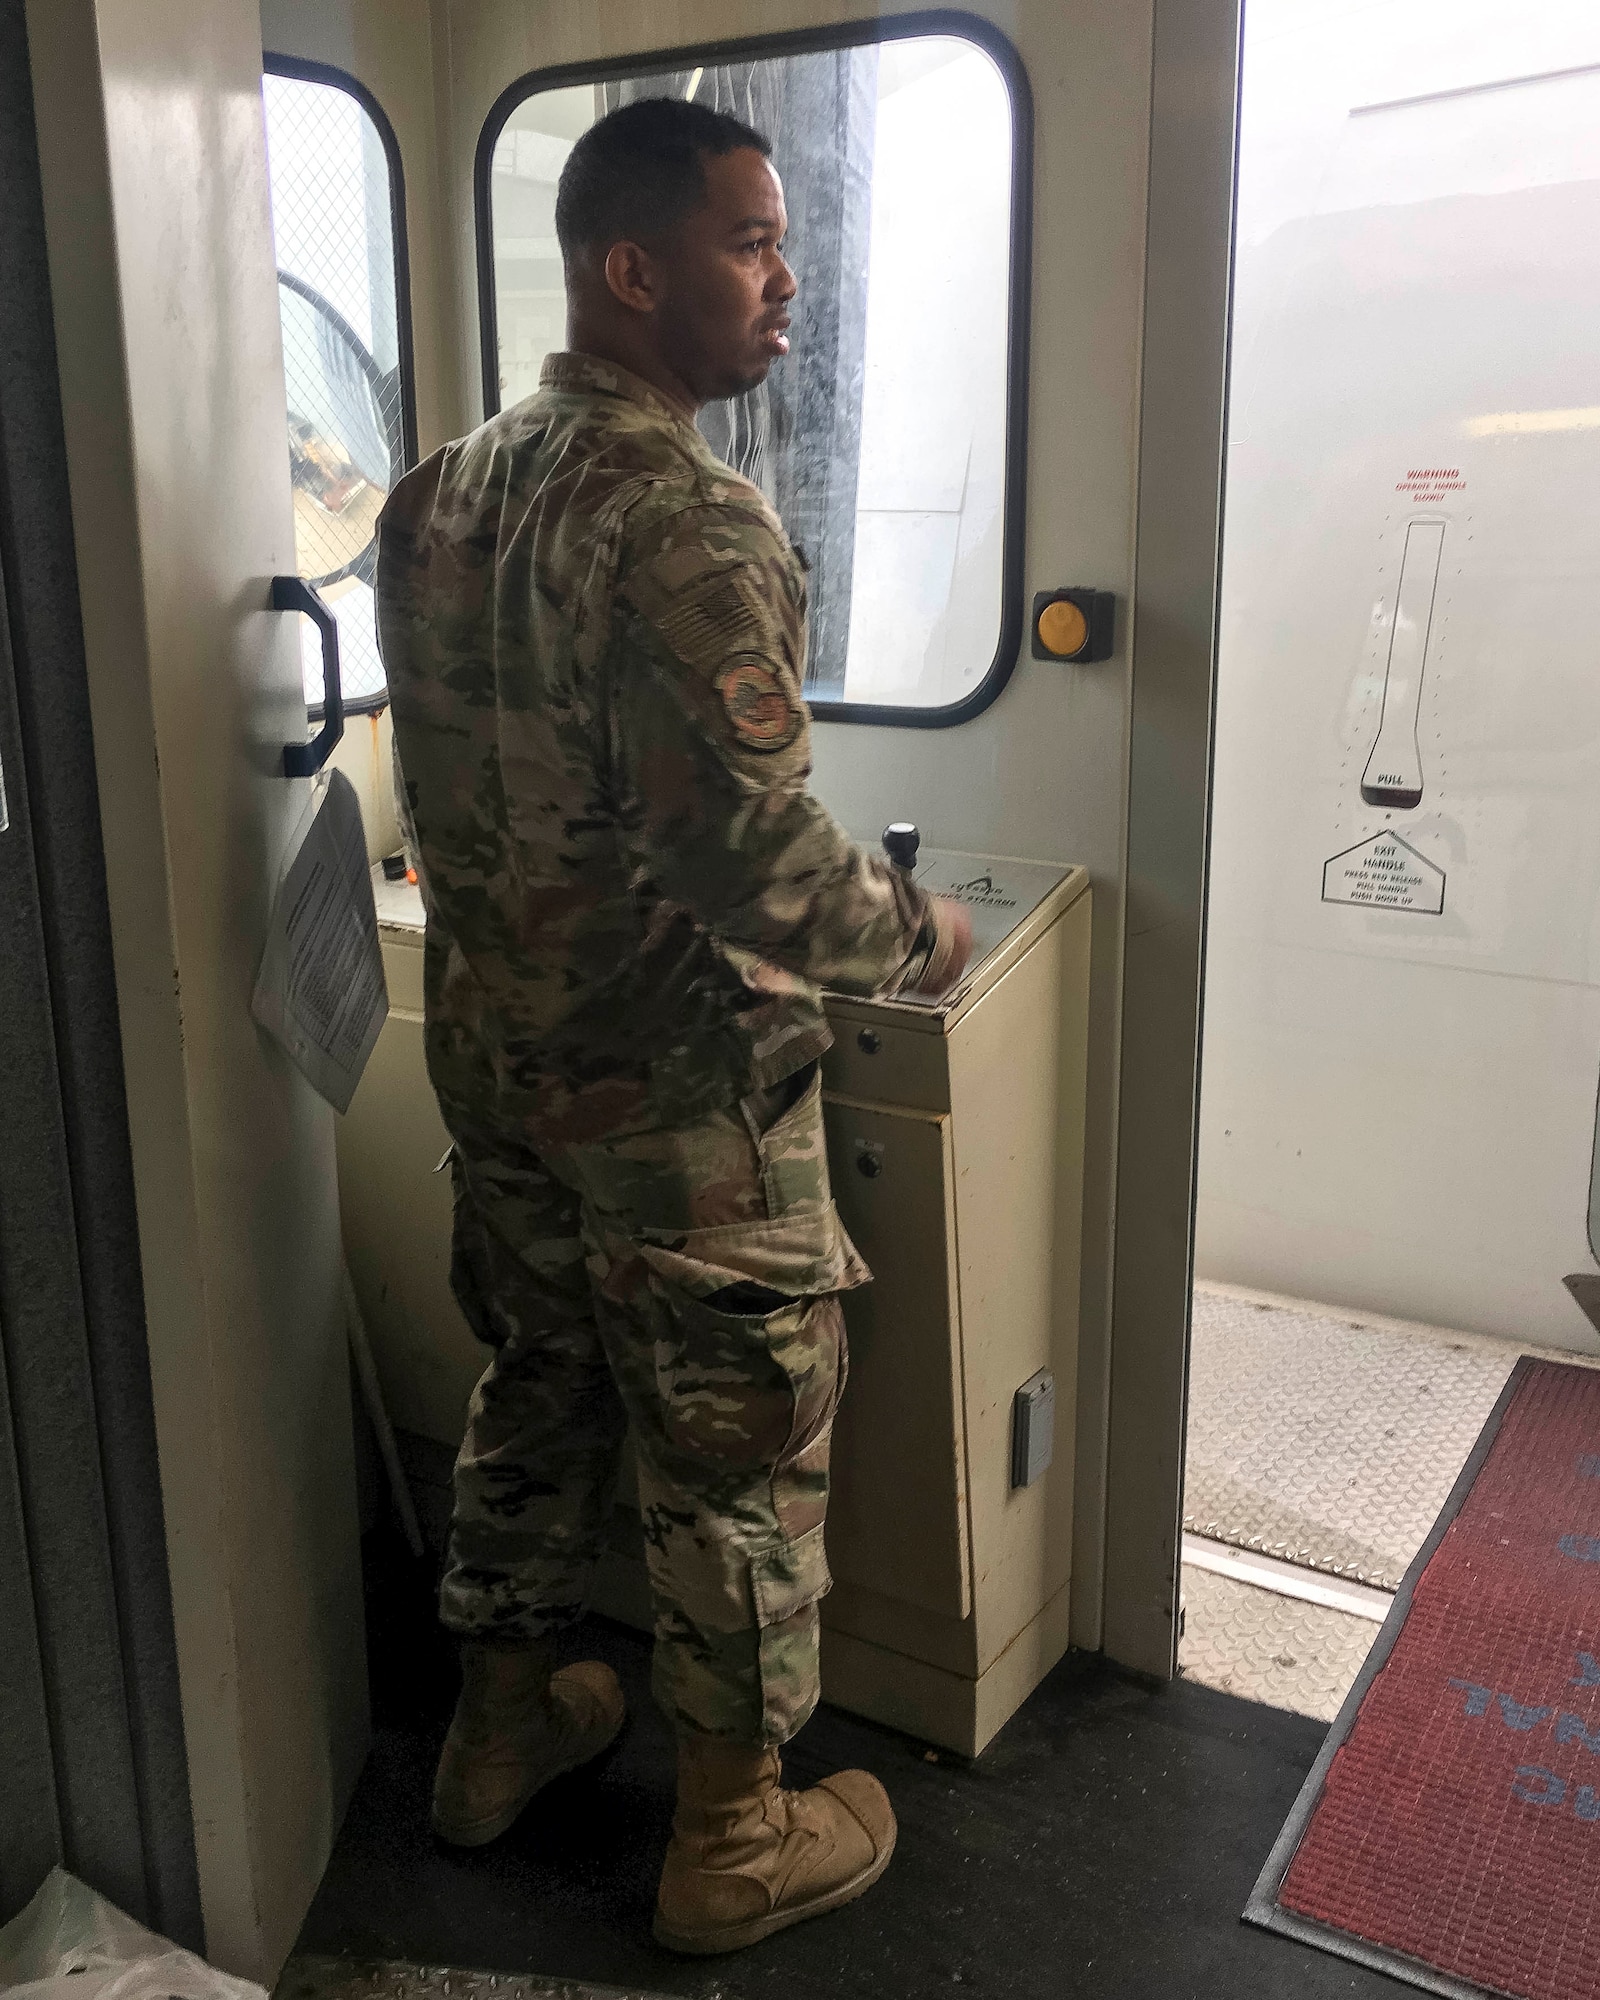 Senior Airman Chase Richards, 96th Aerial Port Squadron air transportation specialist, moves a passenger boarding bridge in place to allow air crew and passenger to board the aircraft at Norfolk, Va. on June 27, 2019. Traditional Reservists have one weekend a month, two weeks a year to fulfill training in order to prepare for real world missions and requirements, ensuring strategic depth and readiness. The 96 APS leverages the air transportation network to provide unique training opportunities and resources for the Reserve Citizen Airmen. (Courtesy photo)